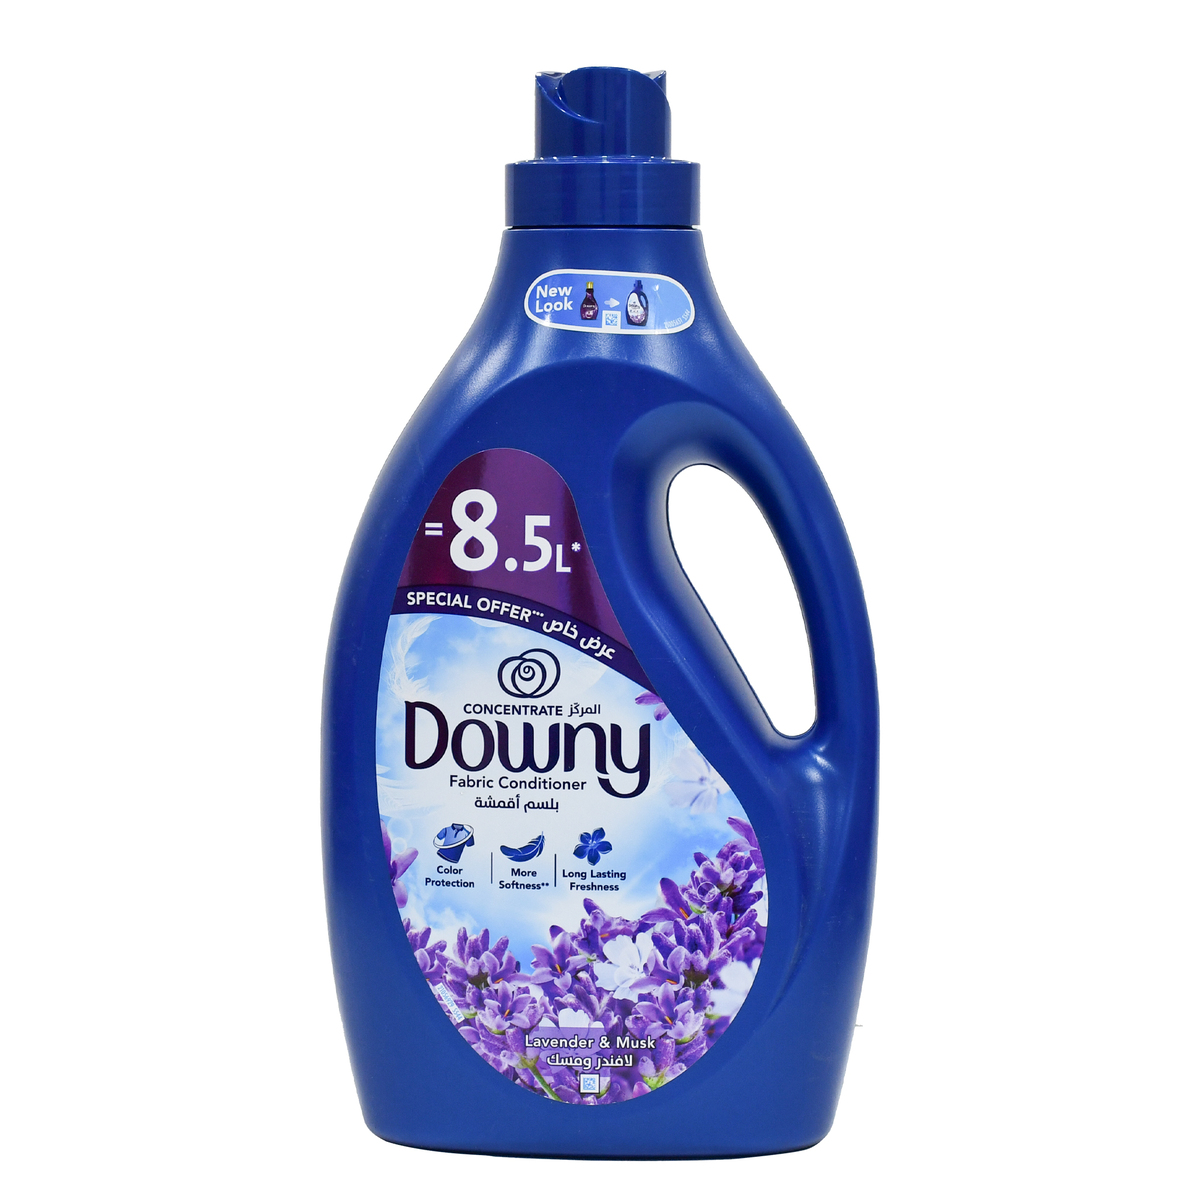 Downy Concentrate Lavender & Musk Fabric Conditioner Value Pack 2.9 Litres